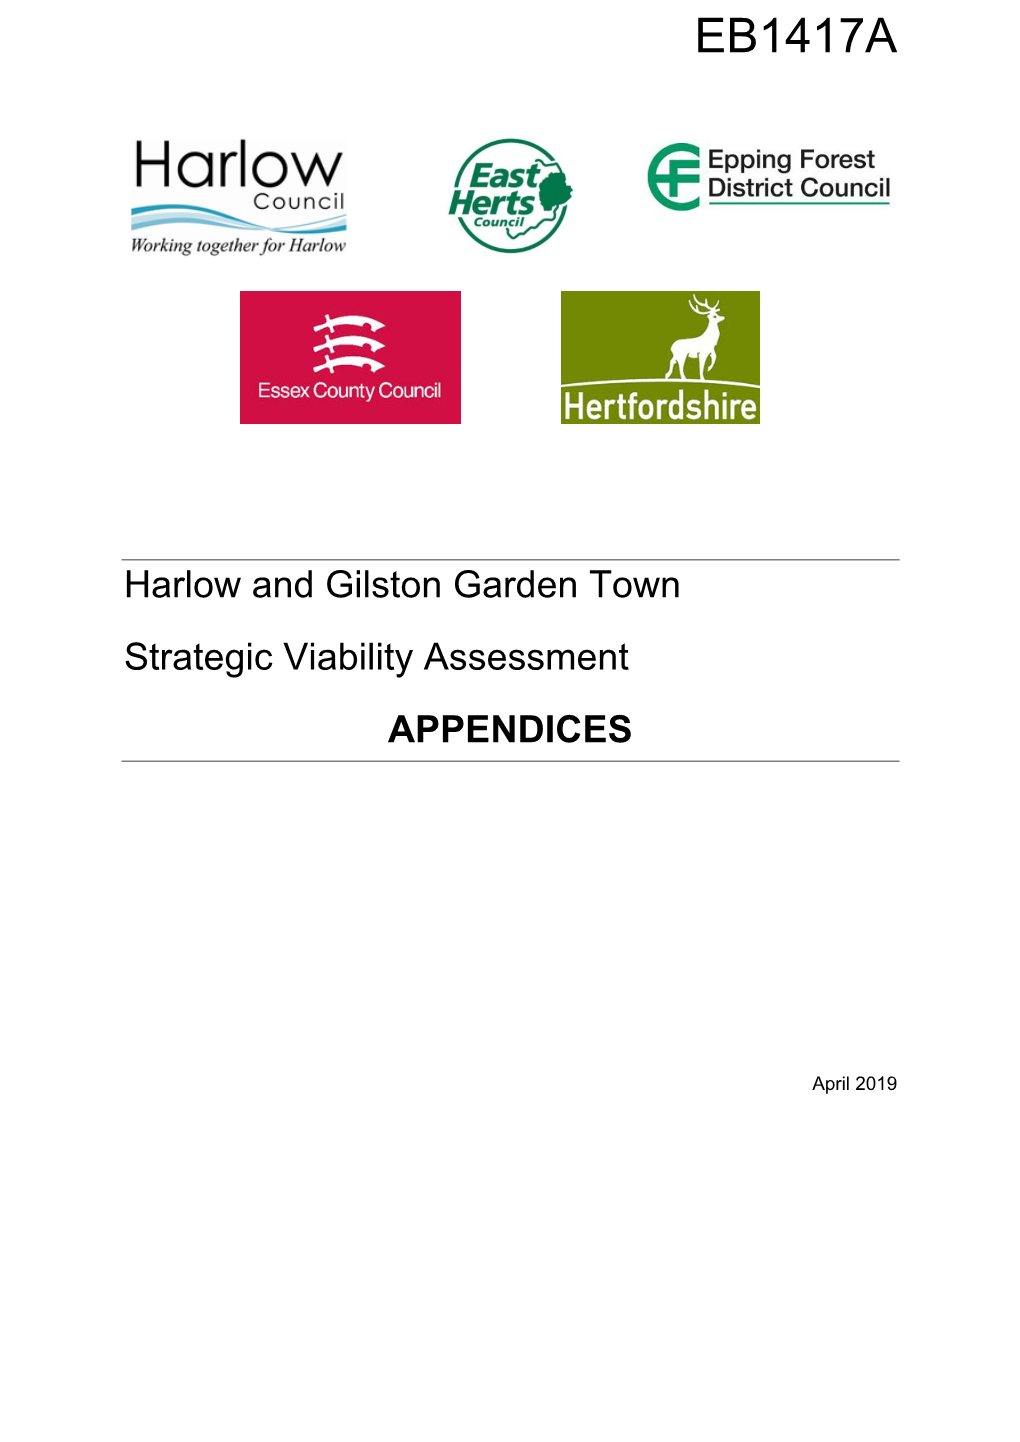 EB1417A-Harlow-And-Gilston-Garden-Town-Strategic-Viability-Assessment